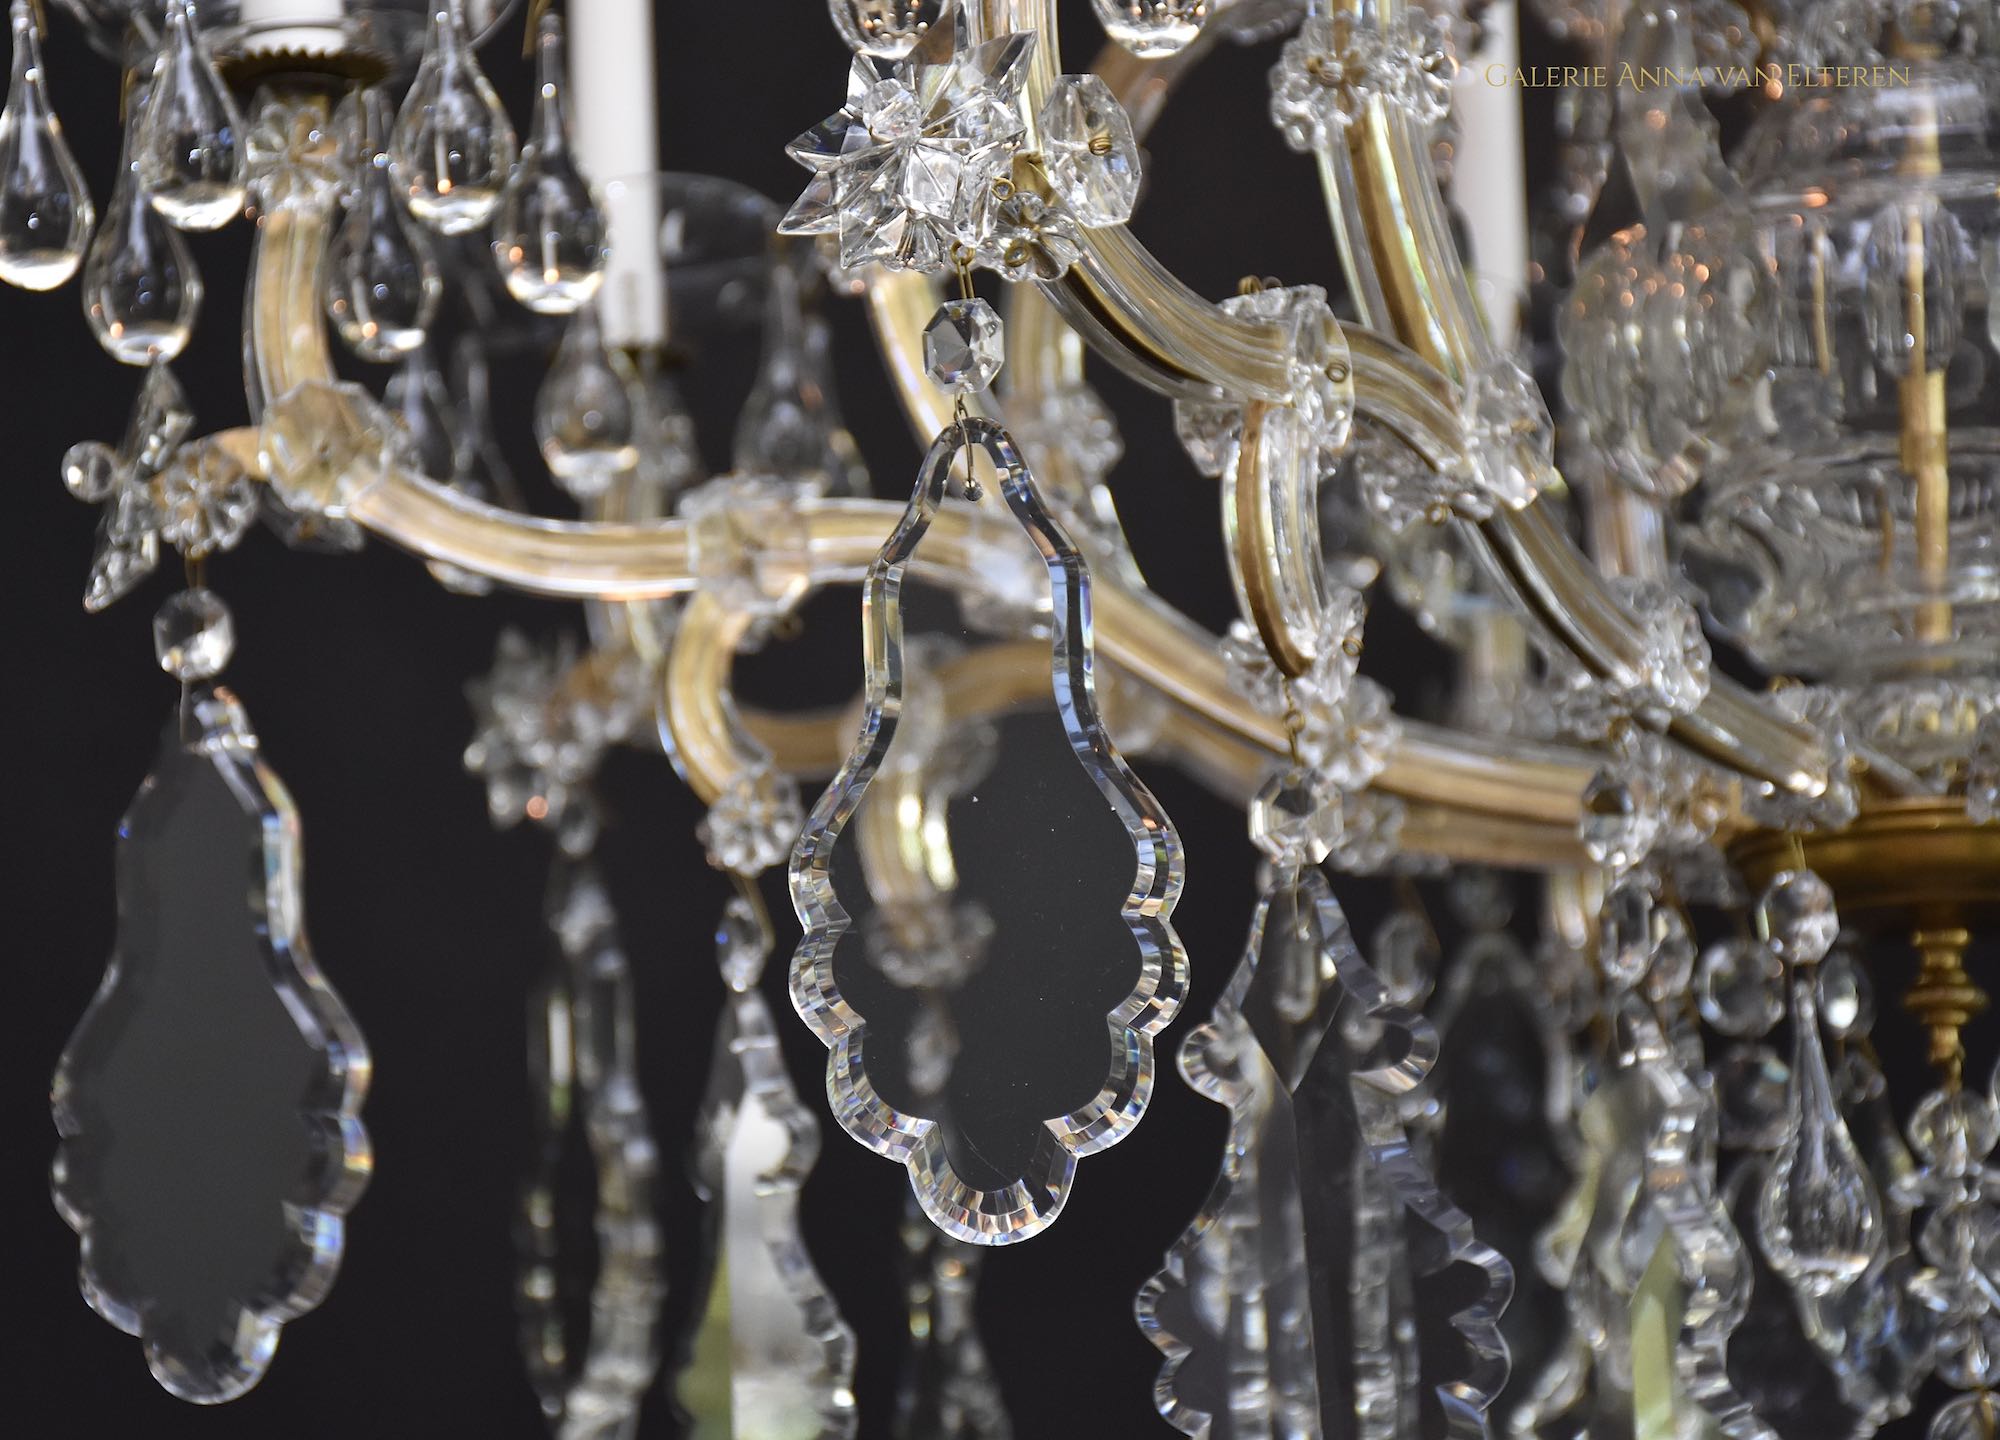 19th c. large crystal chandelier 'Maria Theresia' by Jos. Zahn & Co Vienna